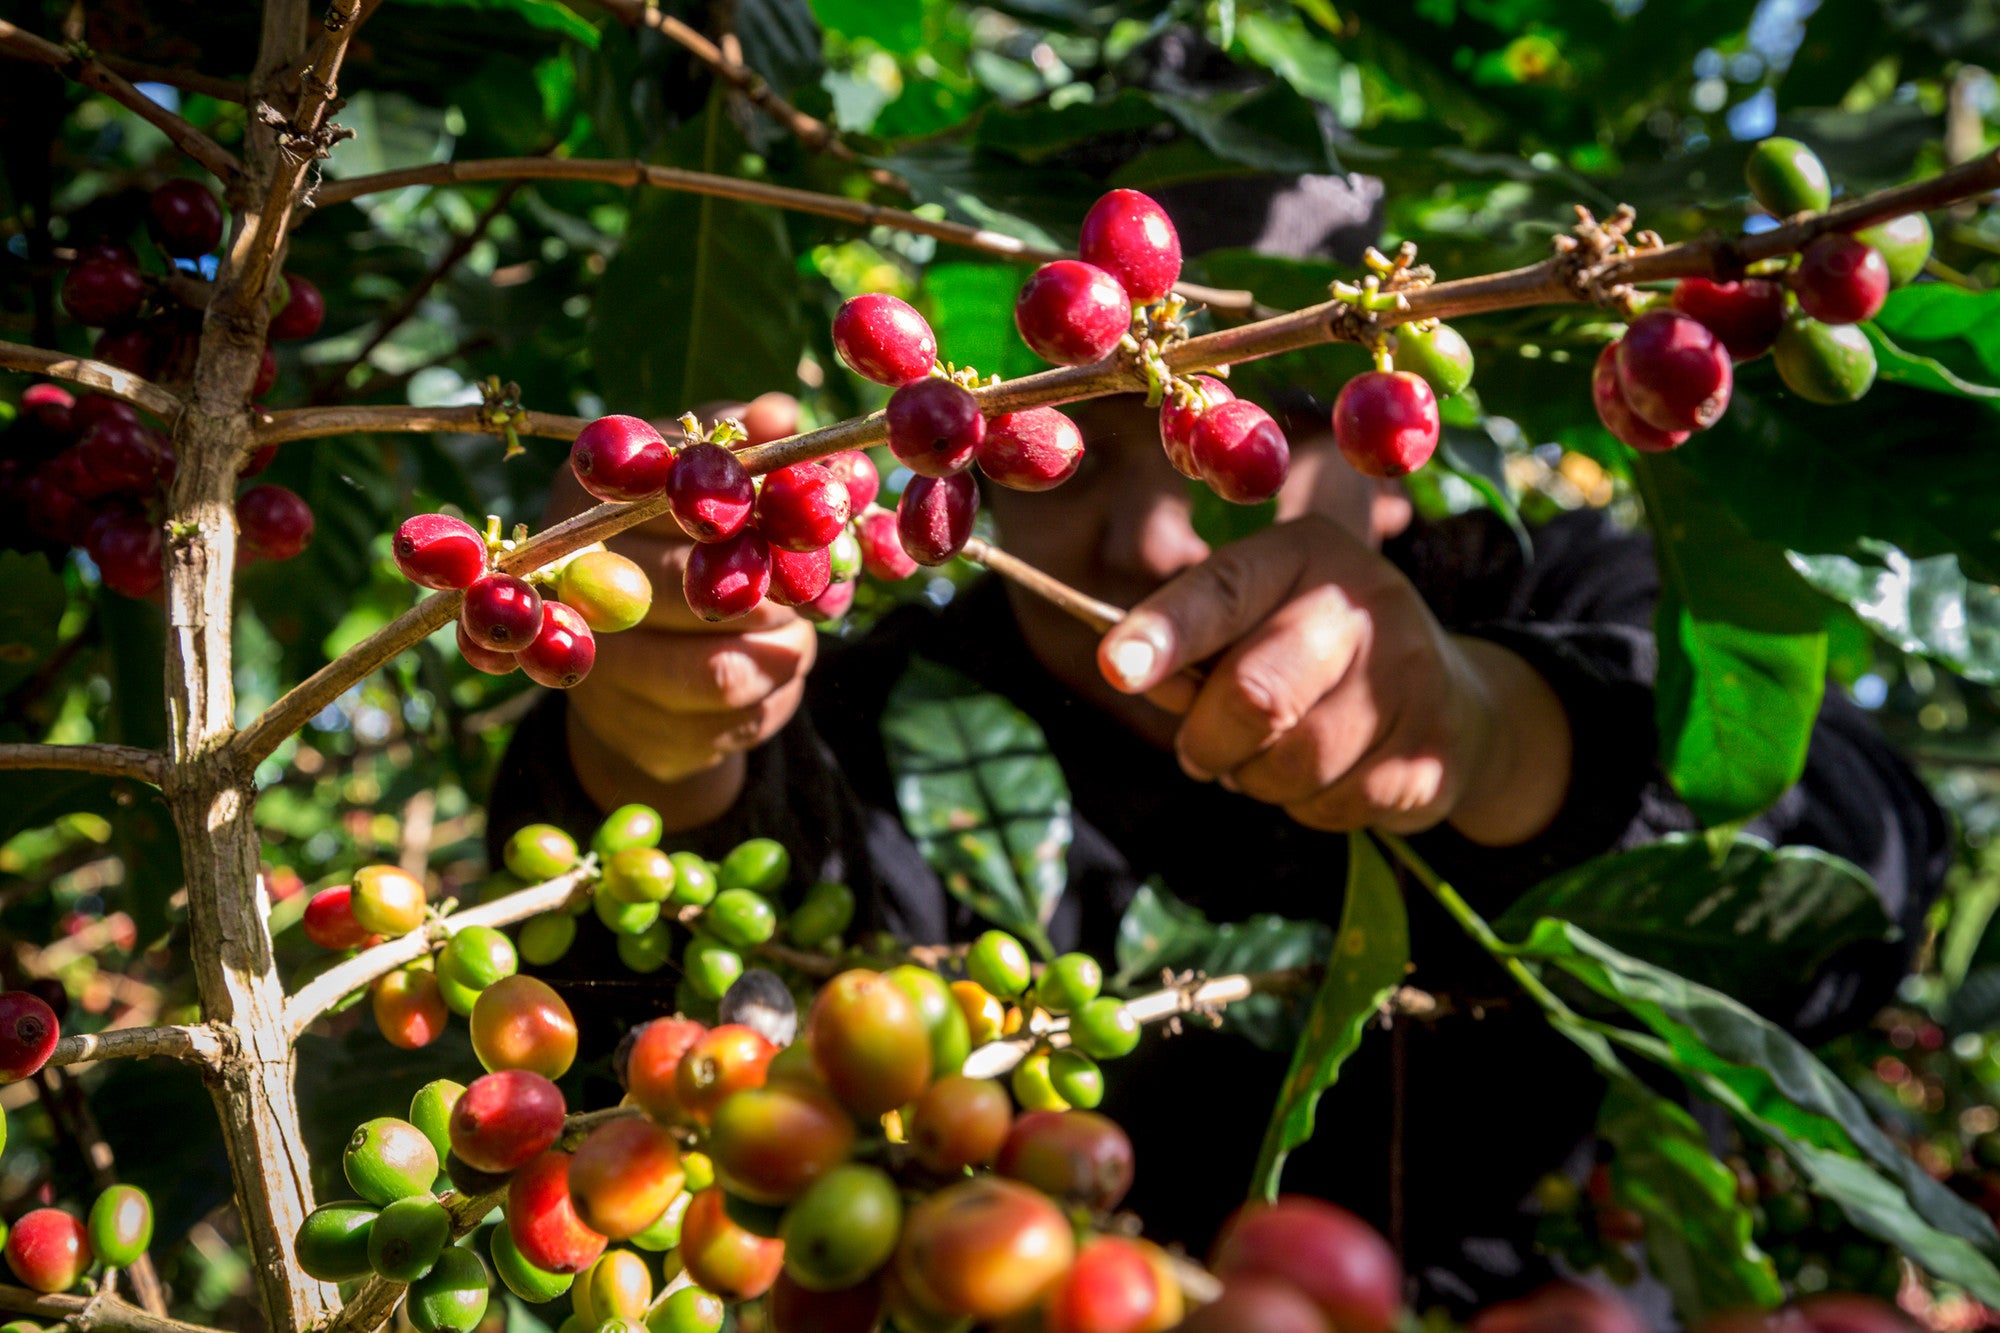 Growing coffee plant in the foreground, woman in the background with hands on plant